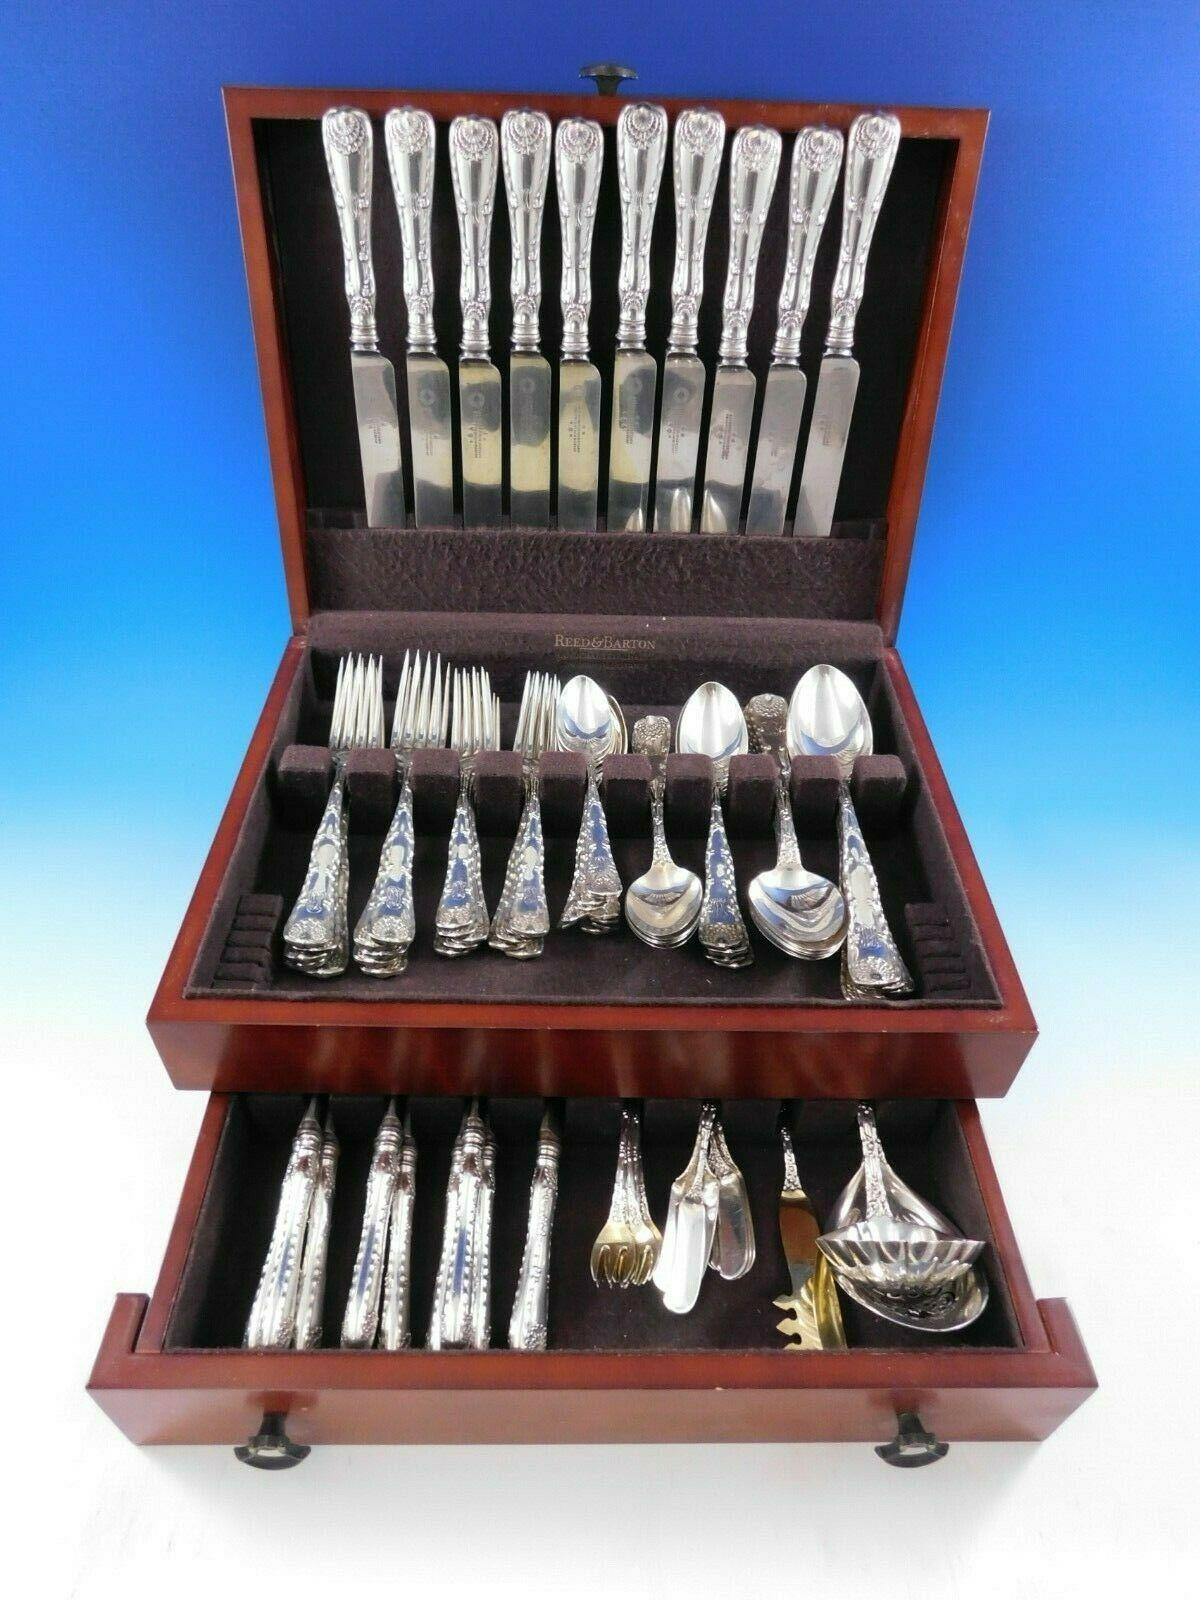 Superb wave edge by Tiffany and Co. sterling silver flatware set - 93 pieces. This set includes:

10 dinner knives, 10 1/2